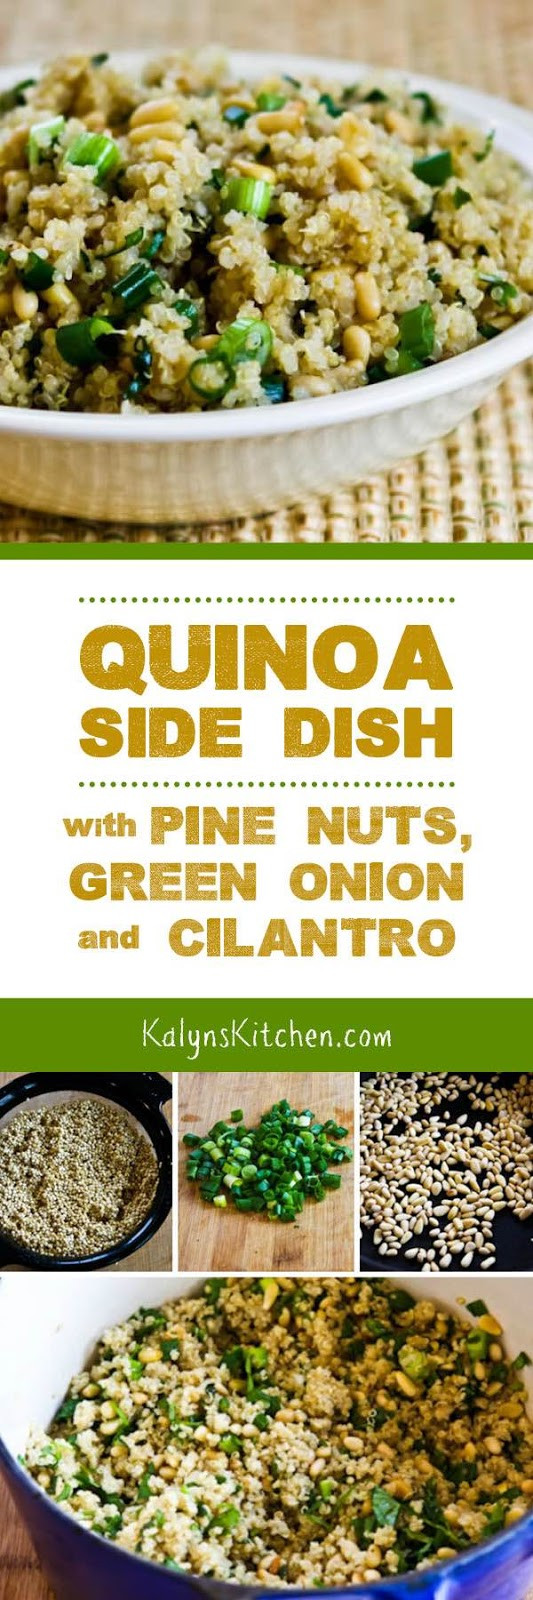 Quinoa Recipes Side Dish
 Quinoa Side Dish with Pine Nuts Green ions and